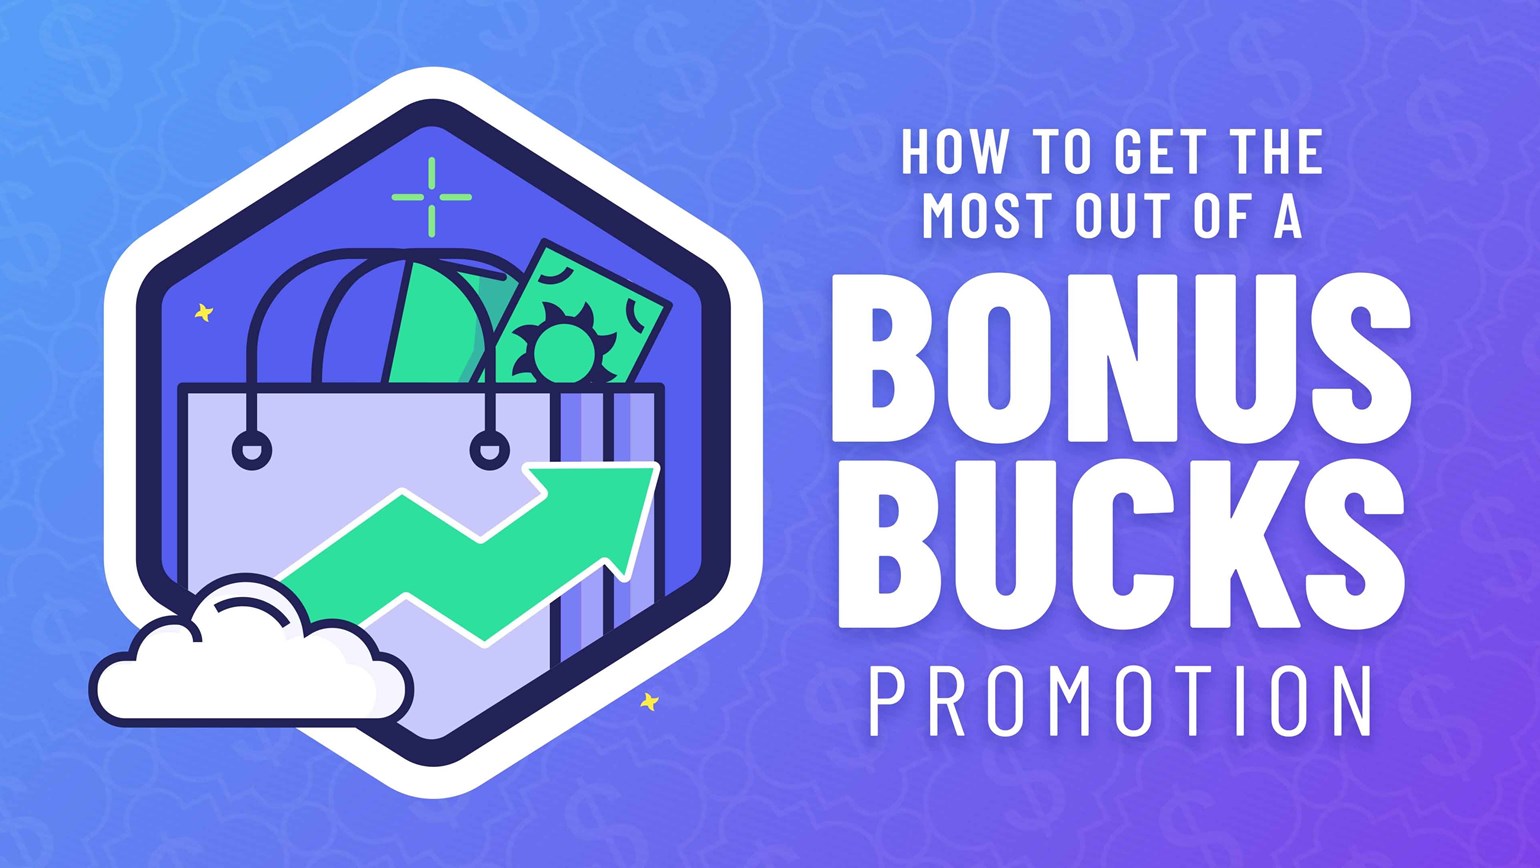 How To Get the Most Out of a TCGplayer Bonus Bucks Promotion: A Seller's Guide